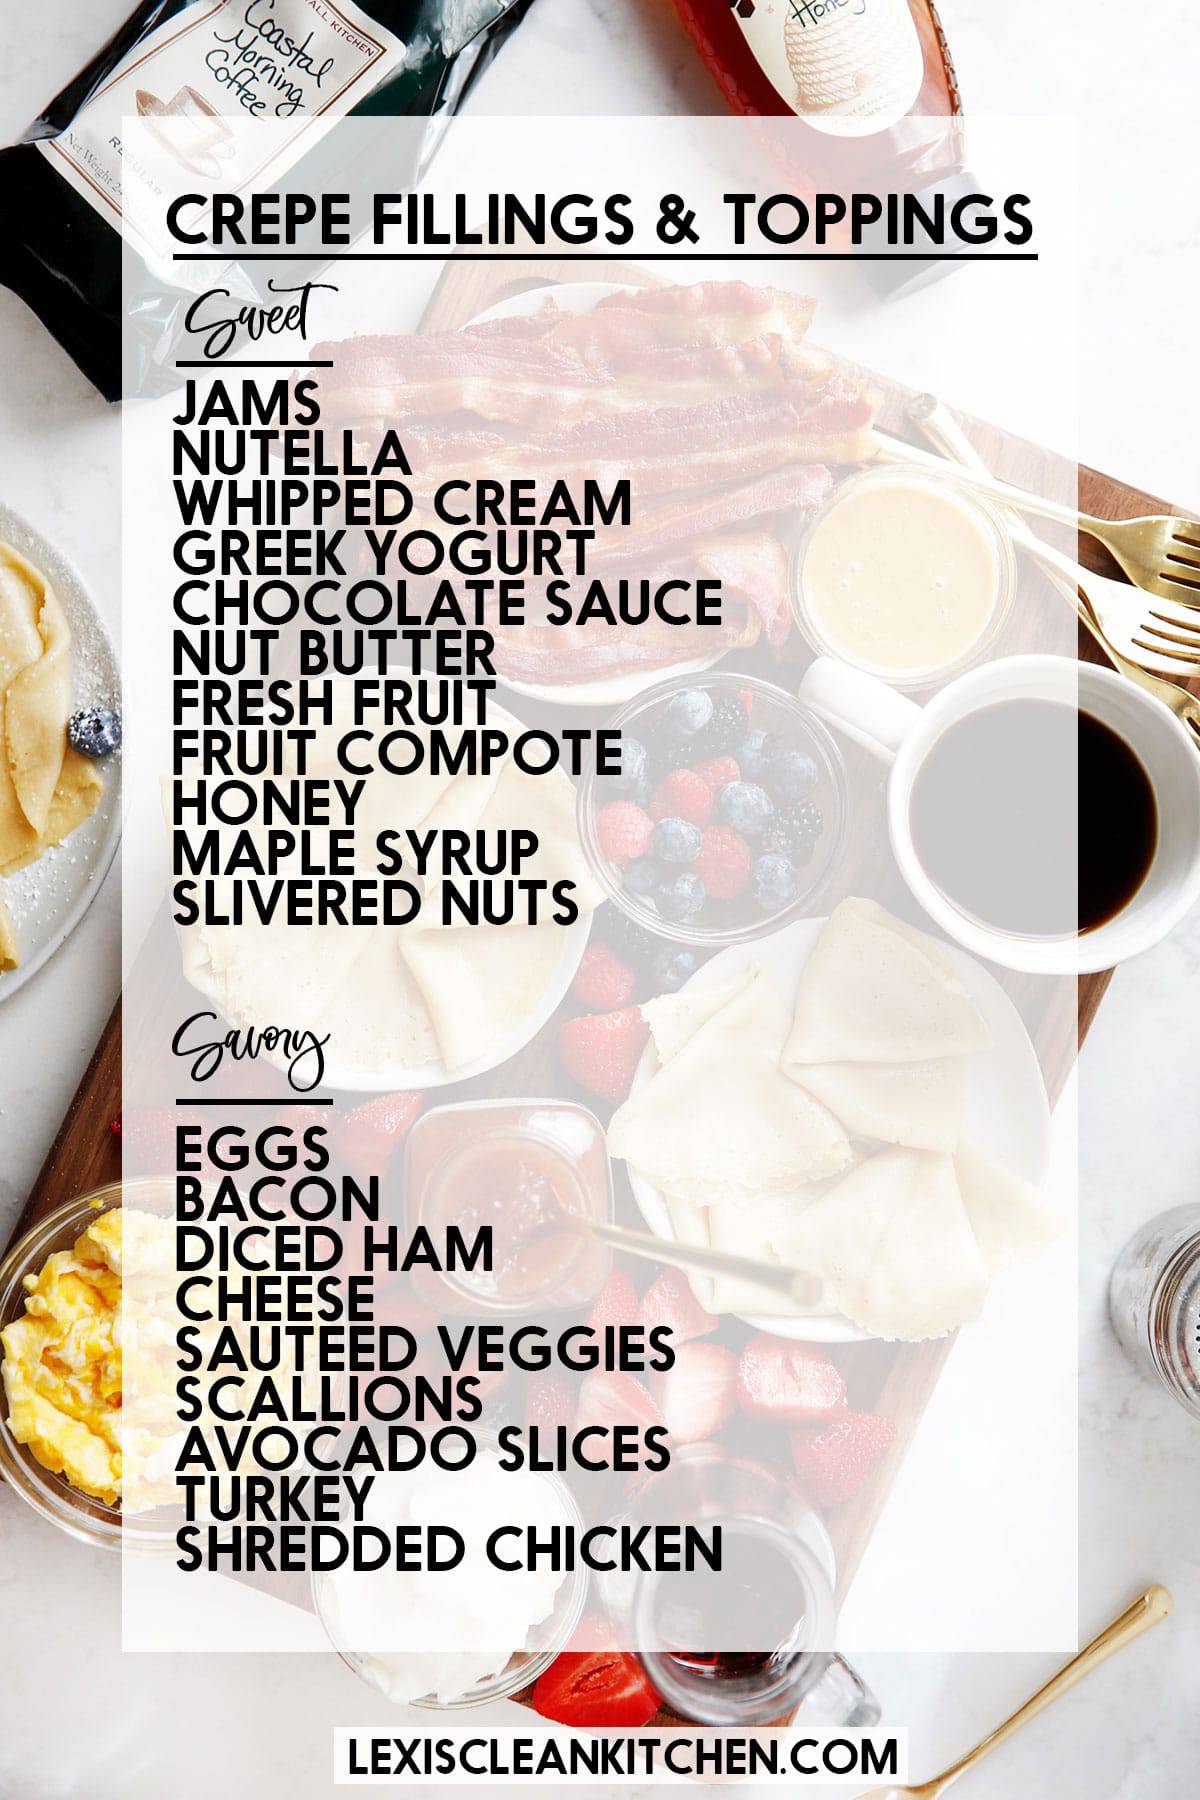 A graphic of gluten-free crepe fillings and toppings.